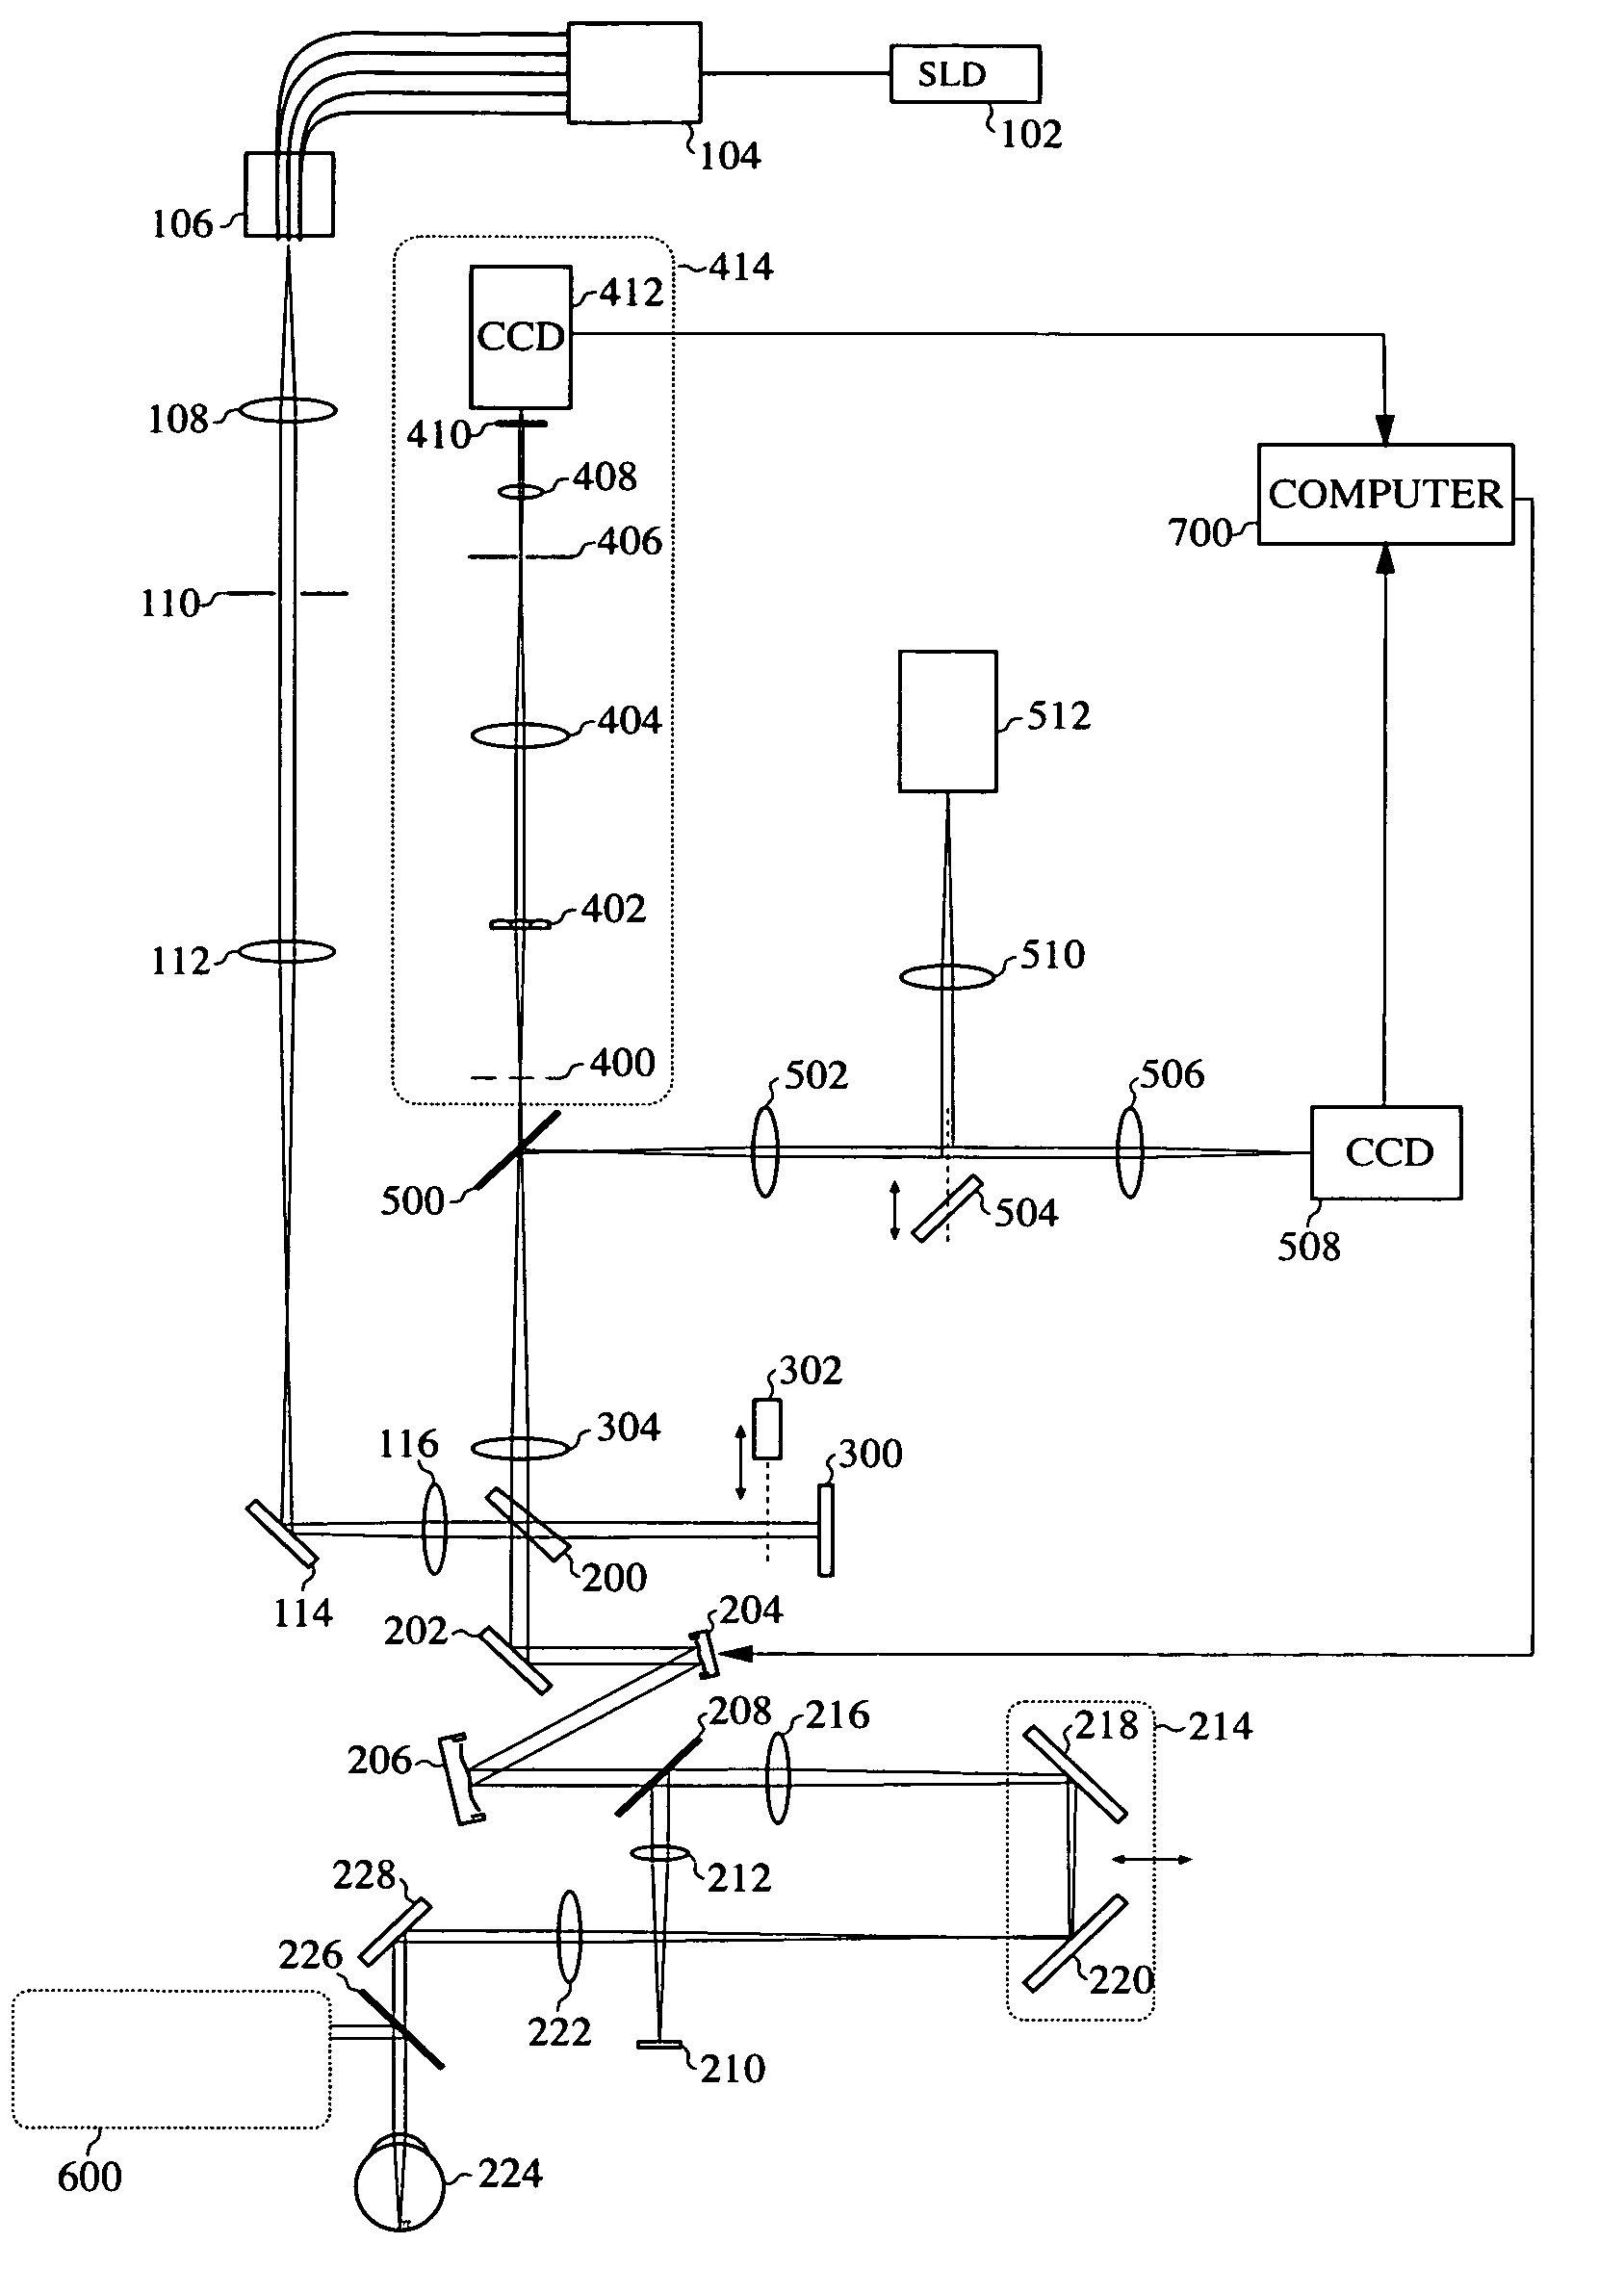 Multi-object wavefront sensor with spatial filtering